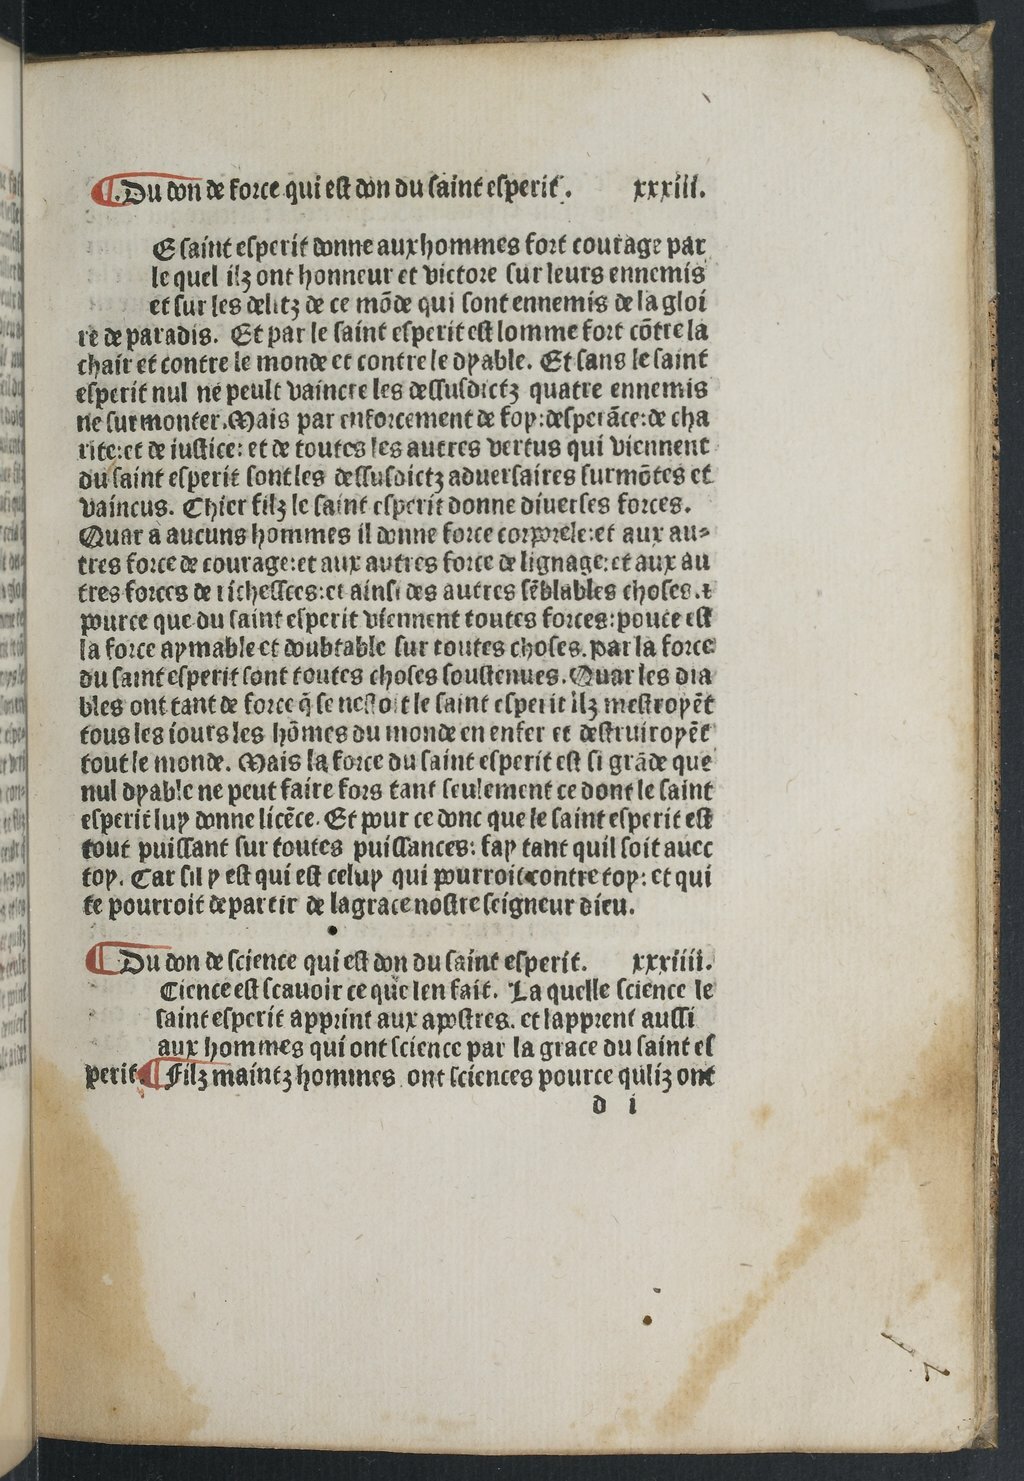 1482 [Antoine Caillaut] Trésor des humains BnF_Page_051.jpg